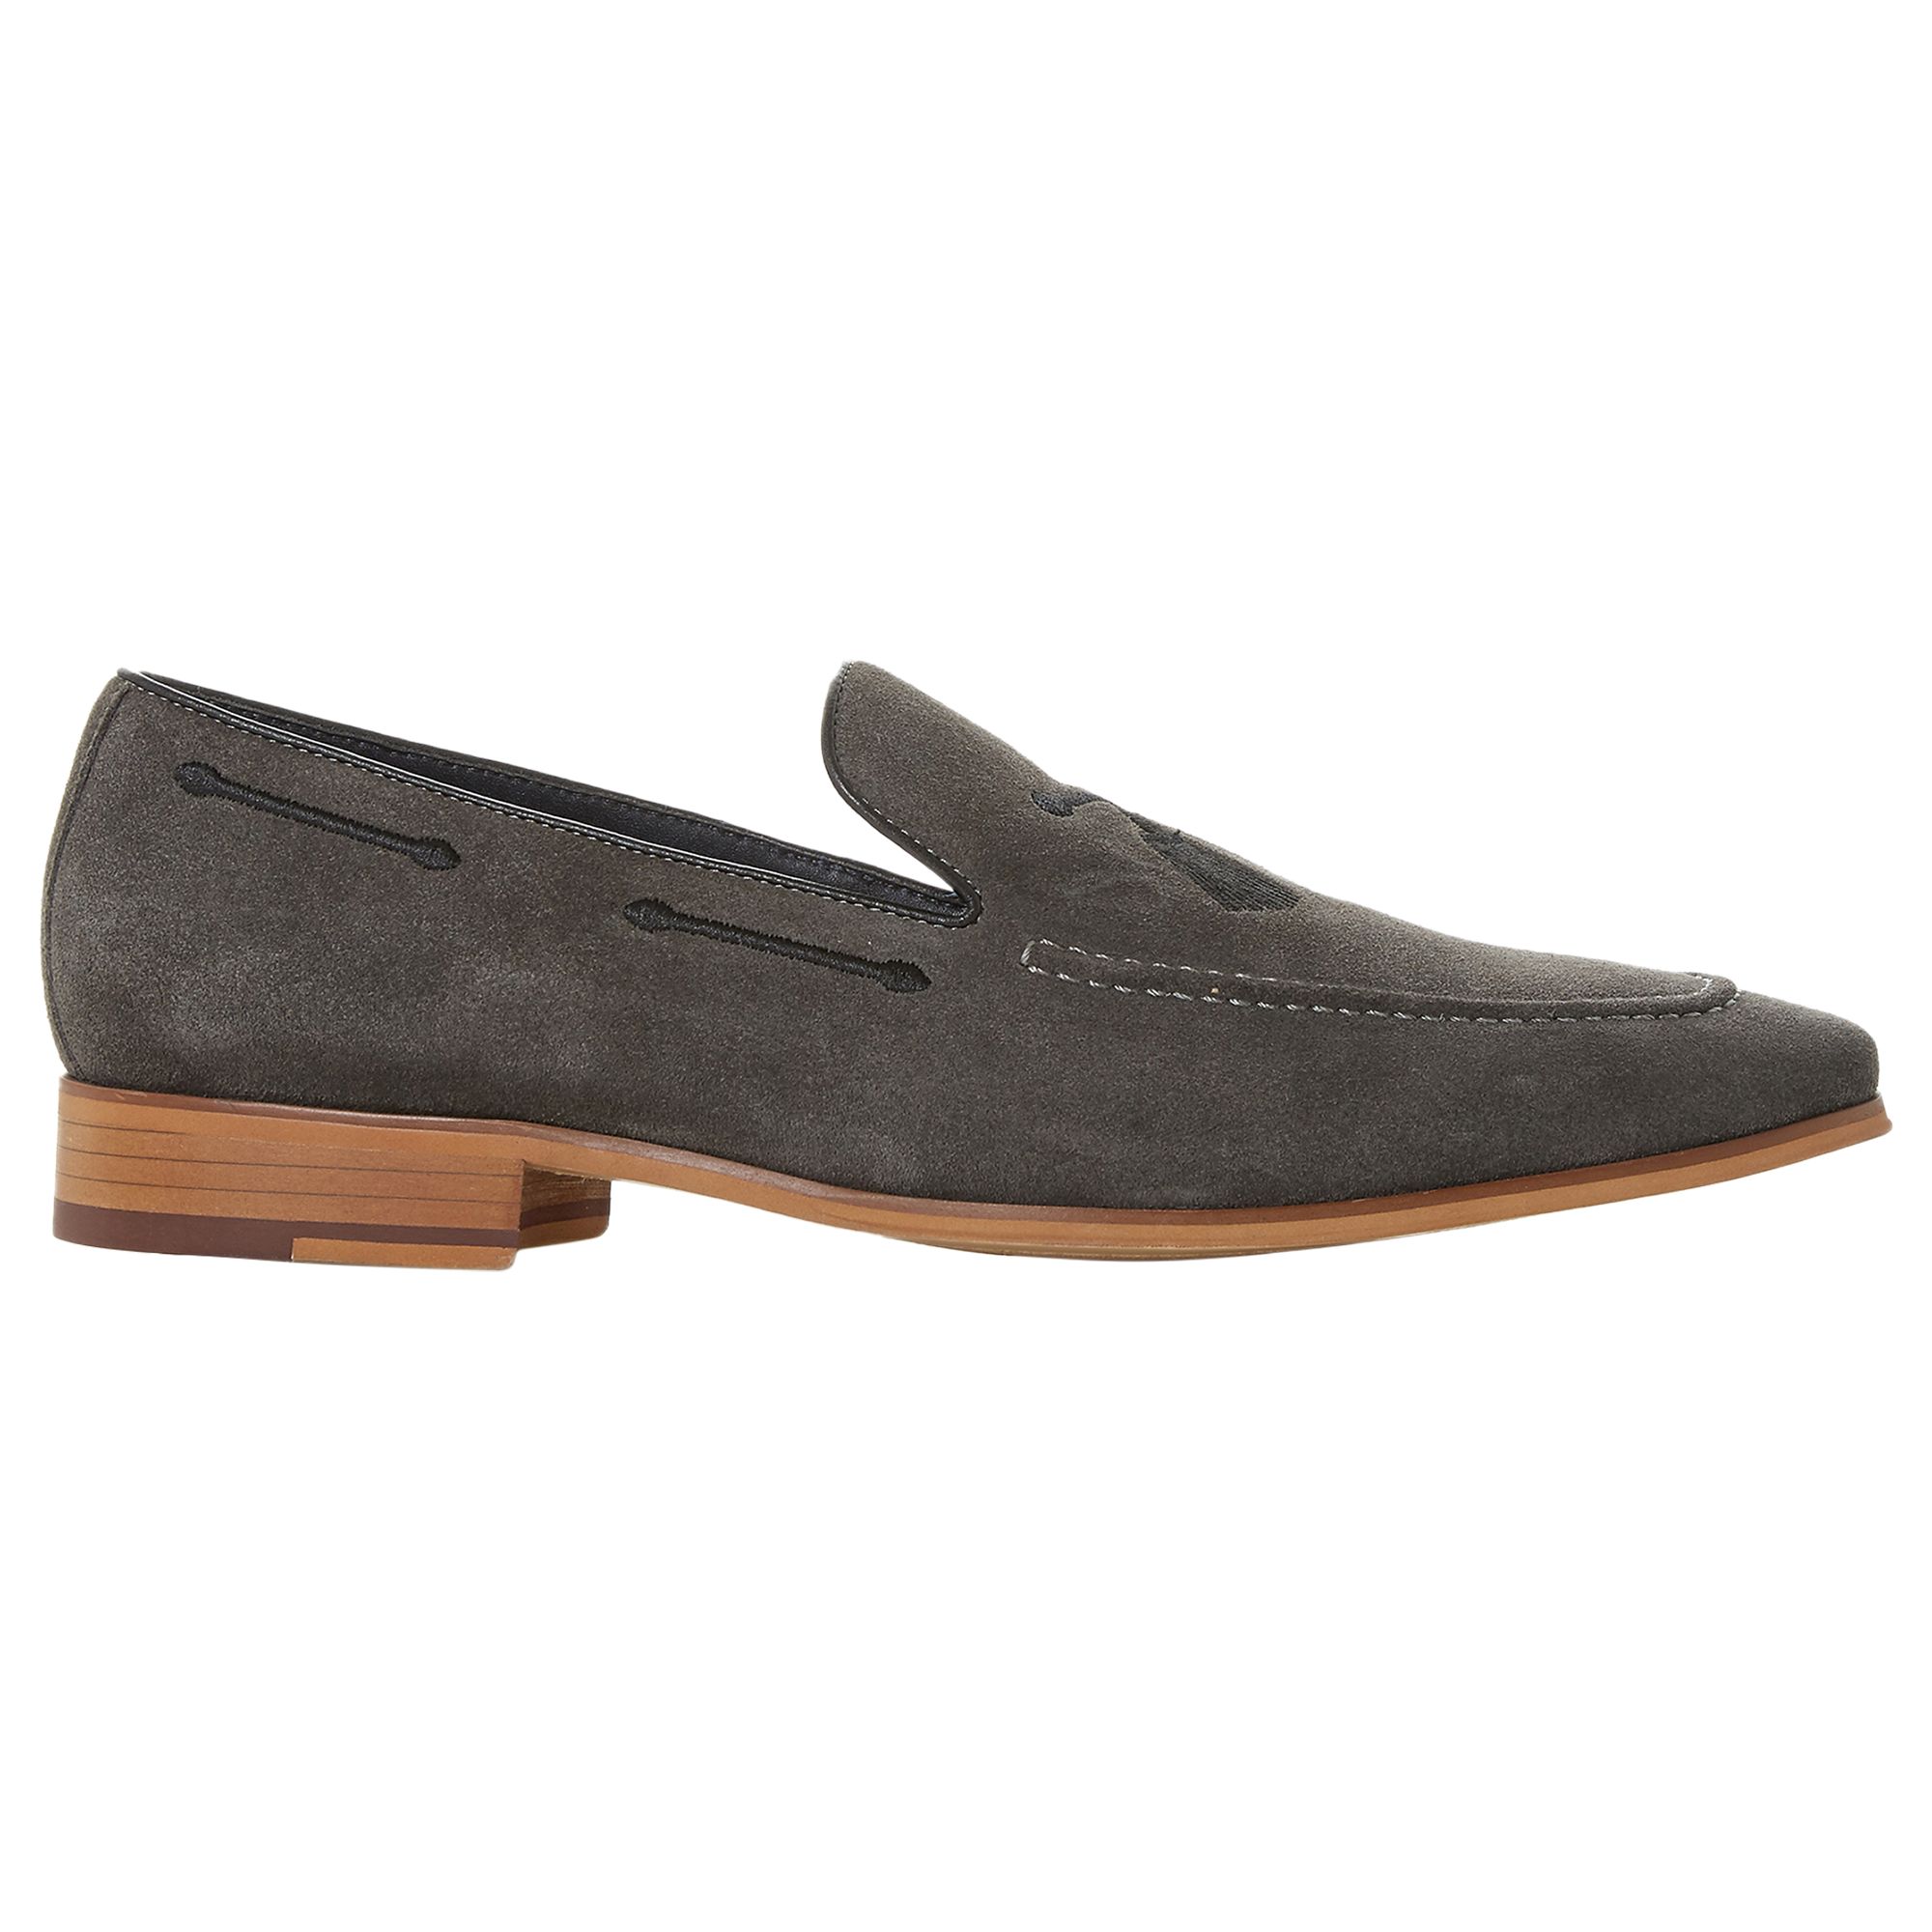 Dune Penry Suede Tassel Embroidered Loafers, Grey, 9